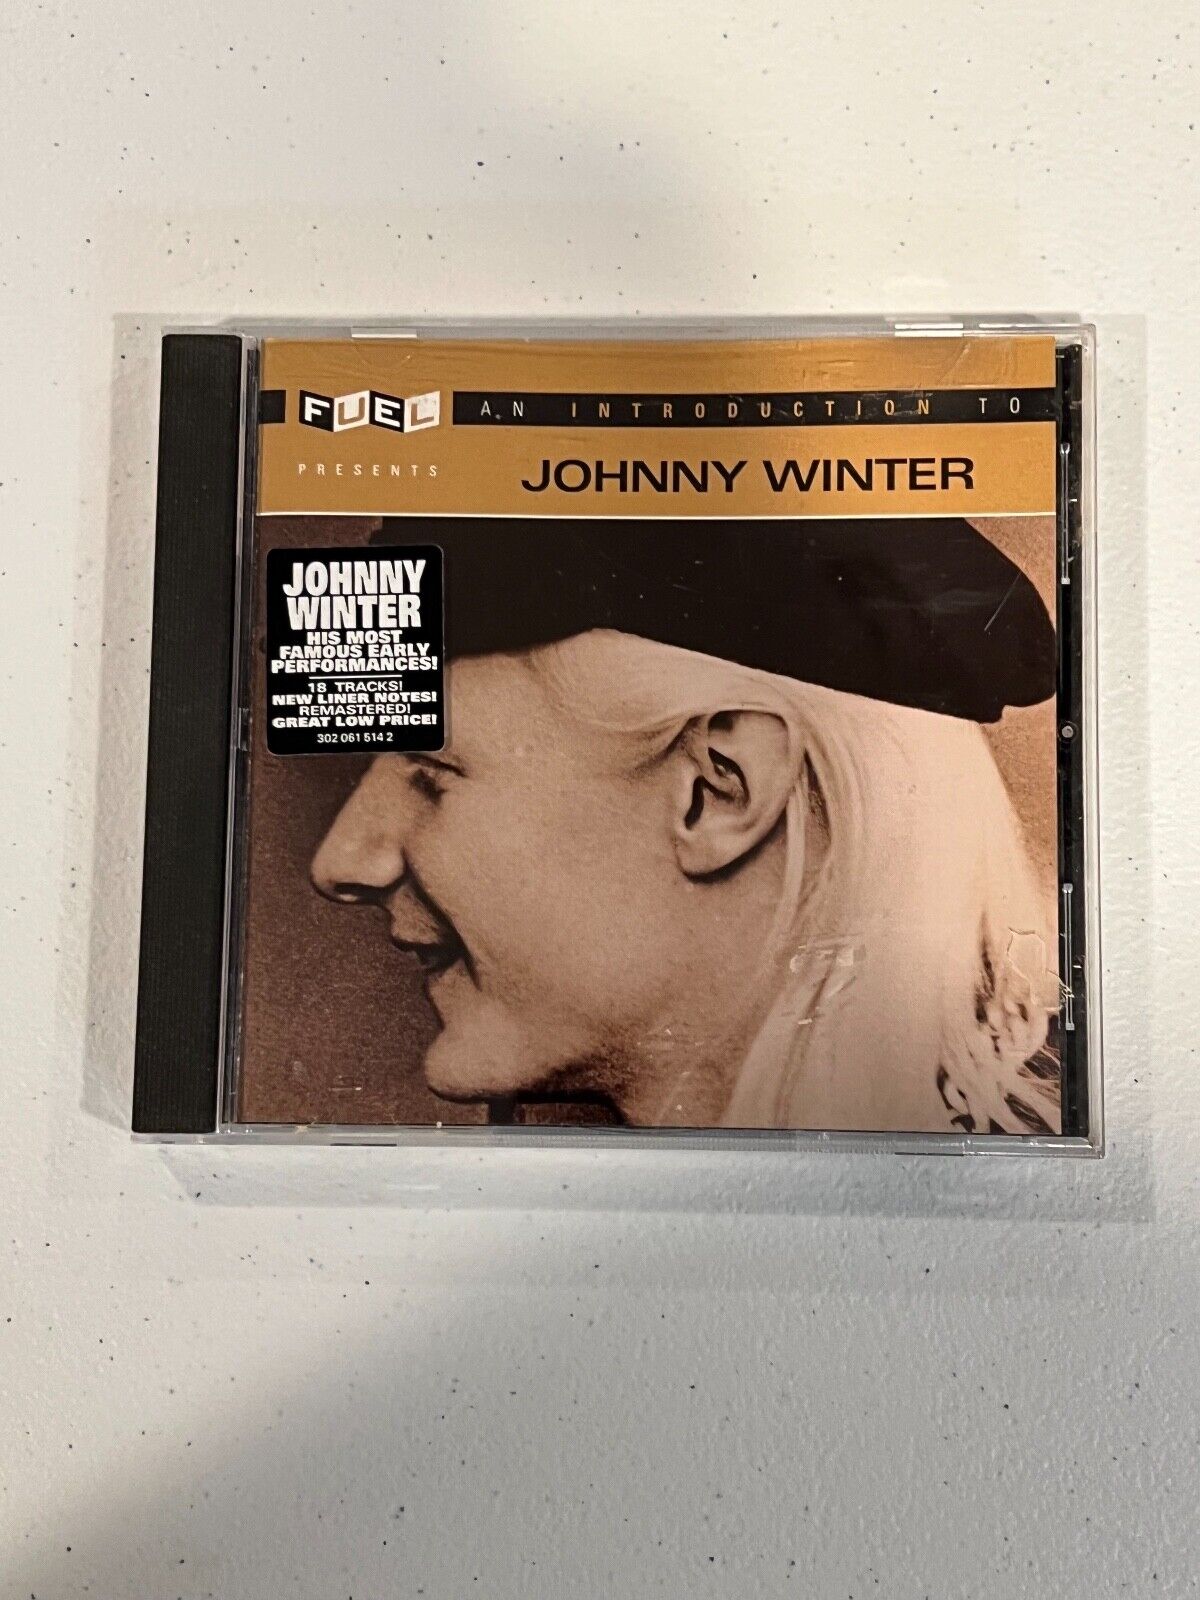 Johnny Winter : An Introduction To CD (2006) Fuel Presents 18 Tracks